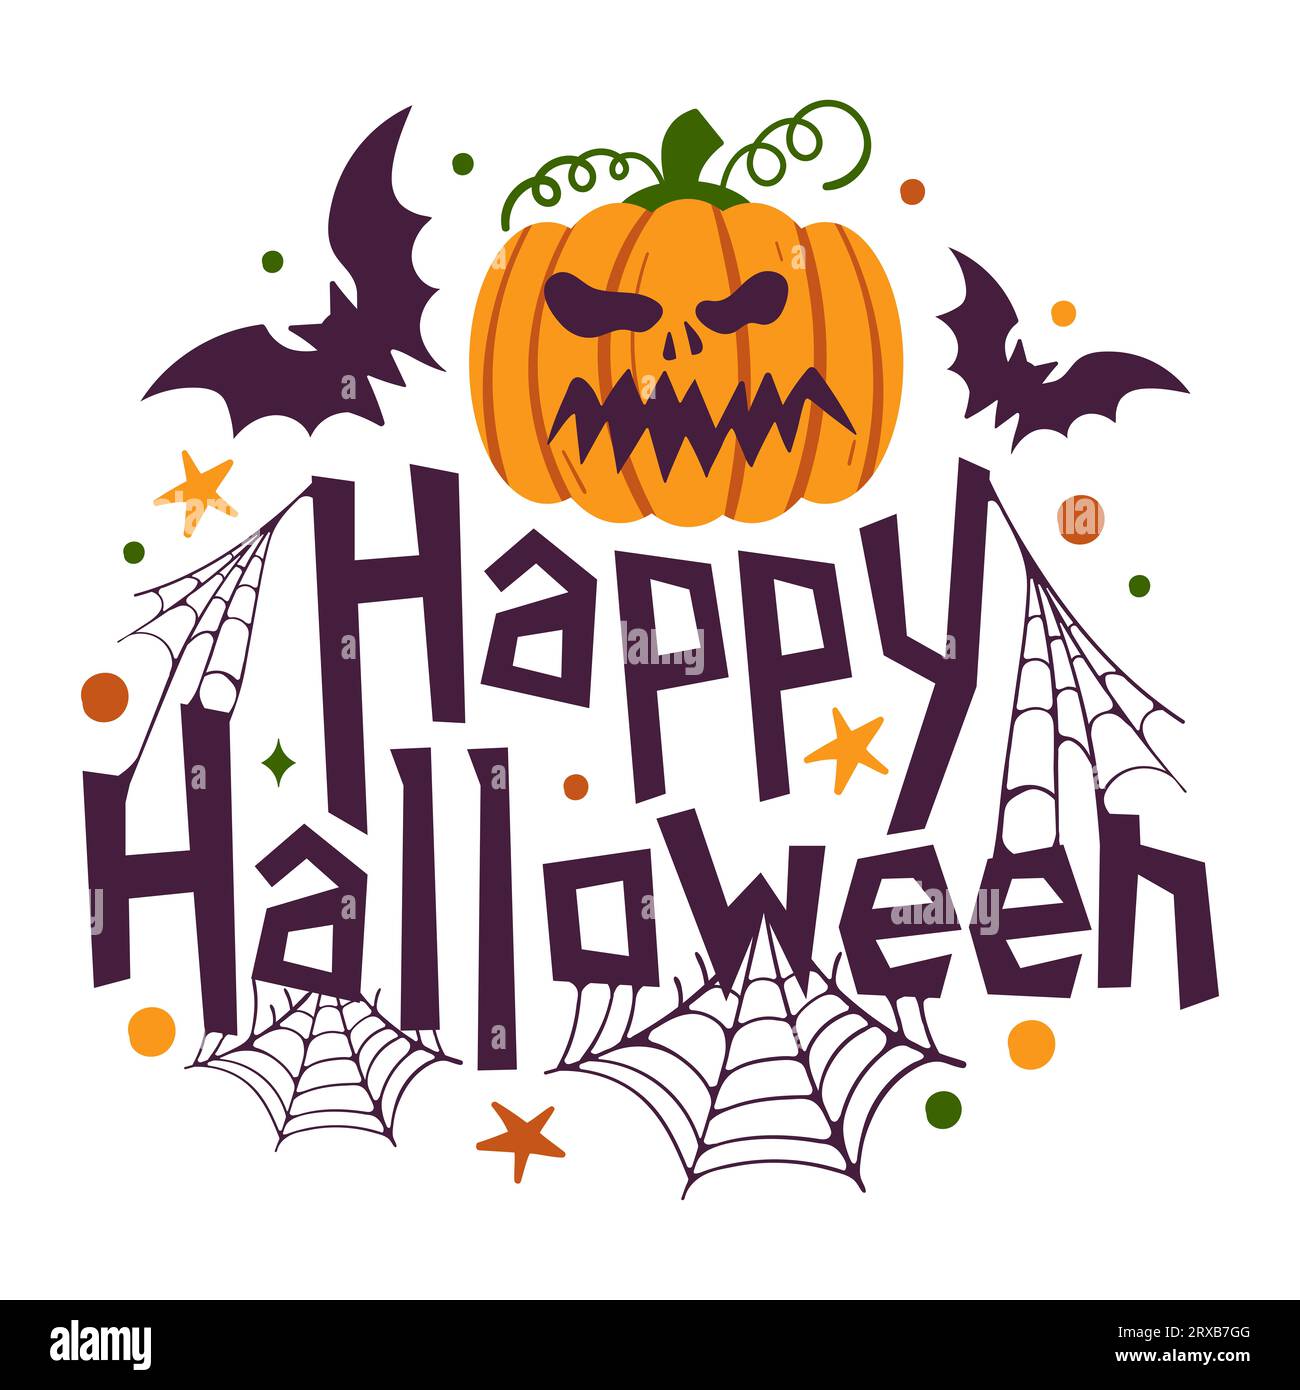 Happy Halloween Typography for T-Shirts, Mugs, Cards, Posters, and More Stock Photo